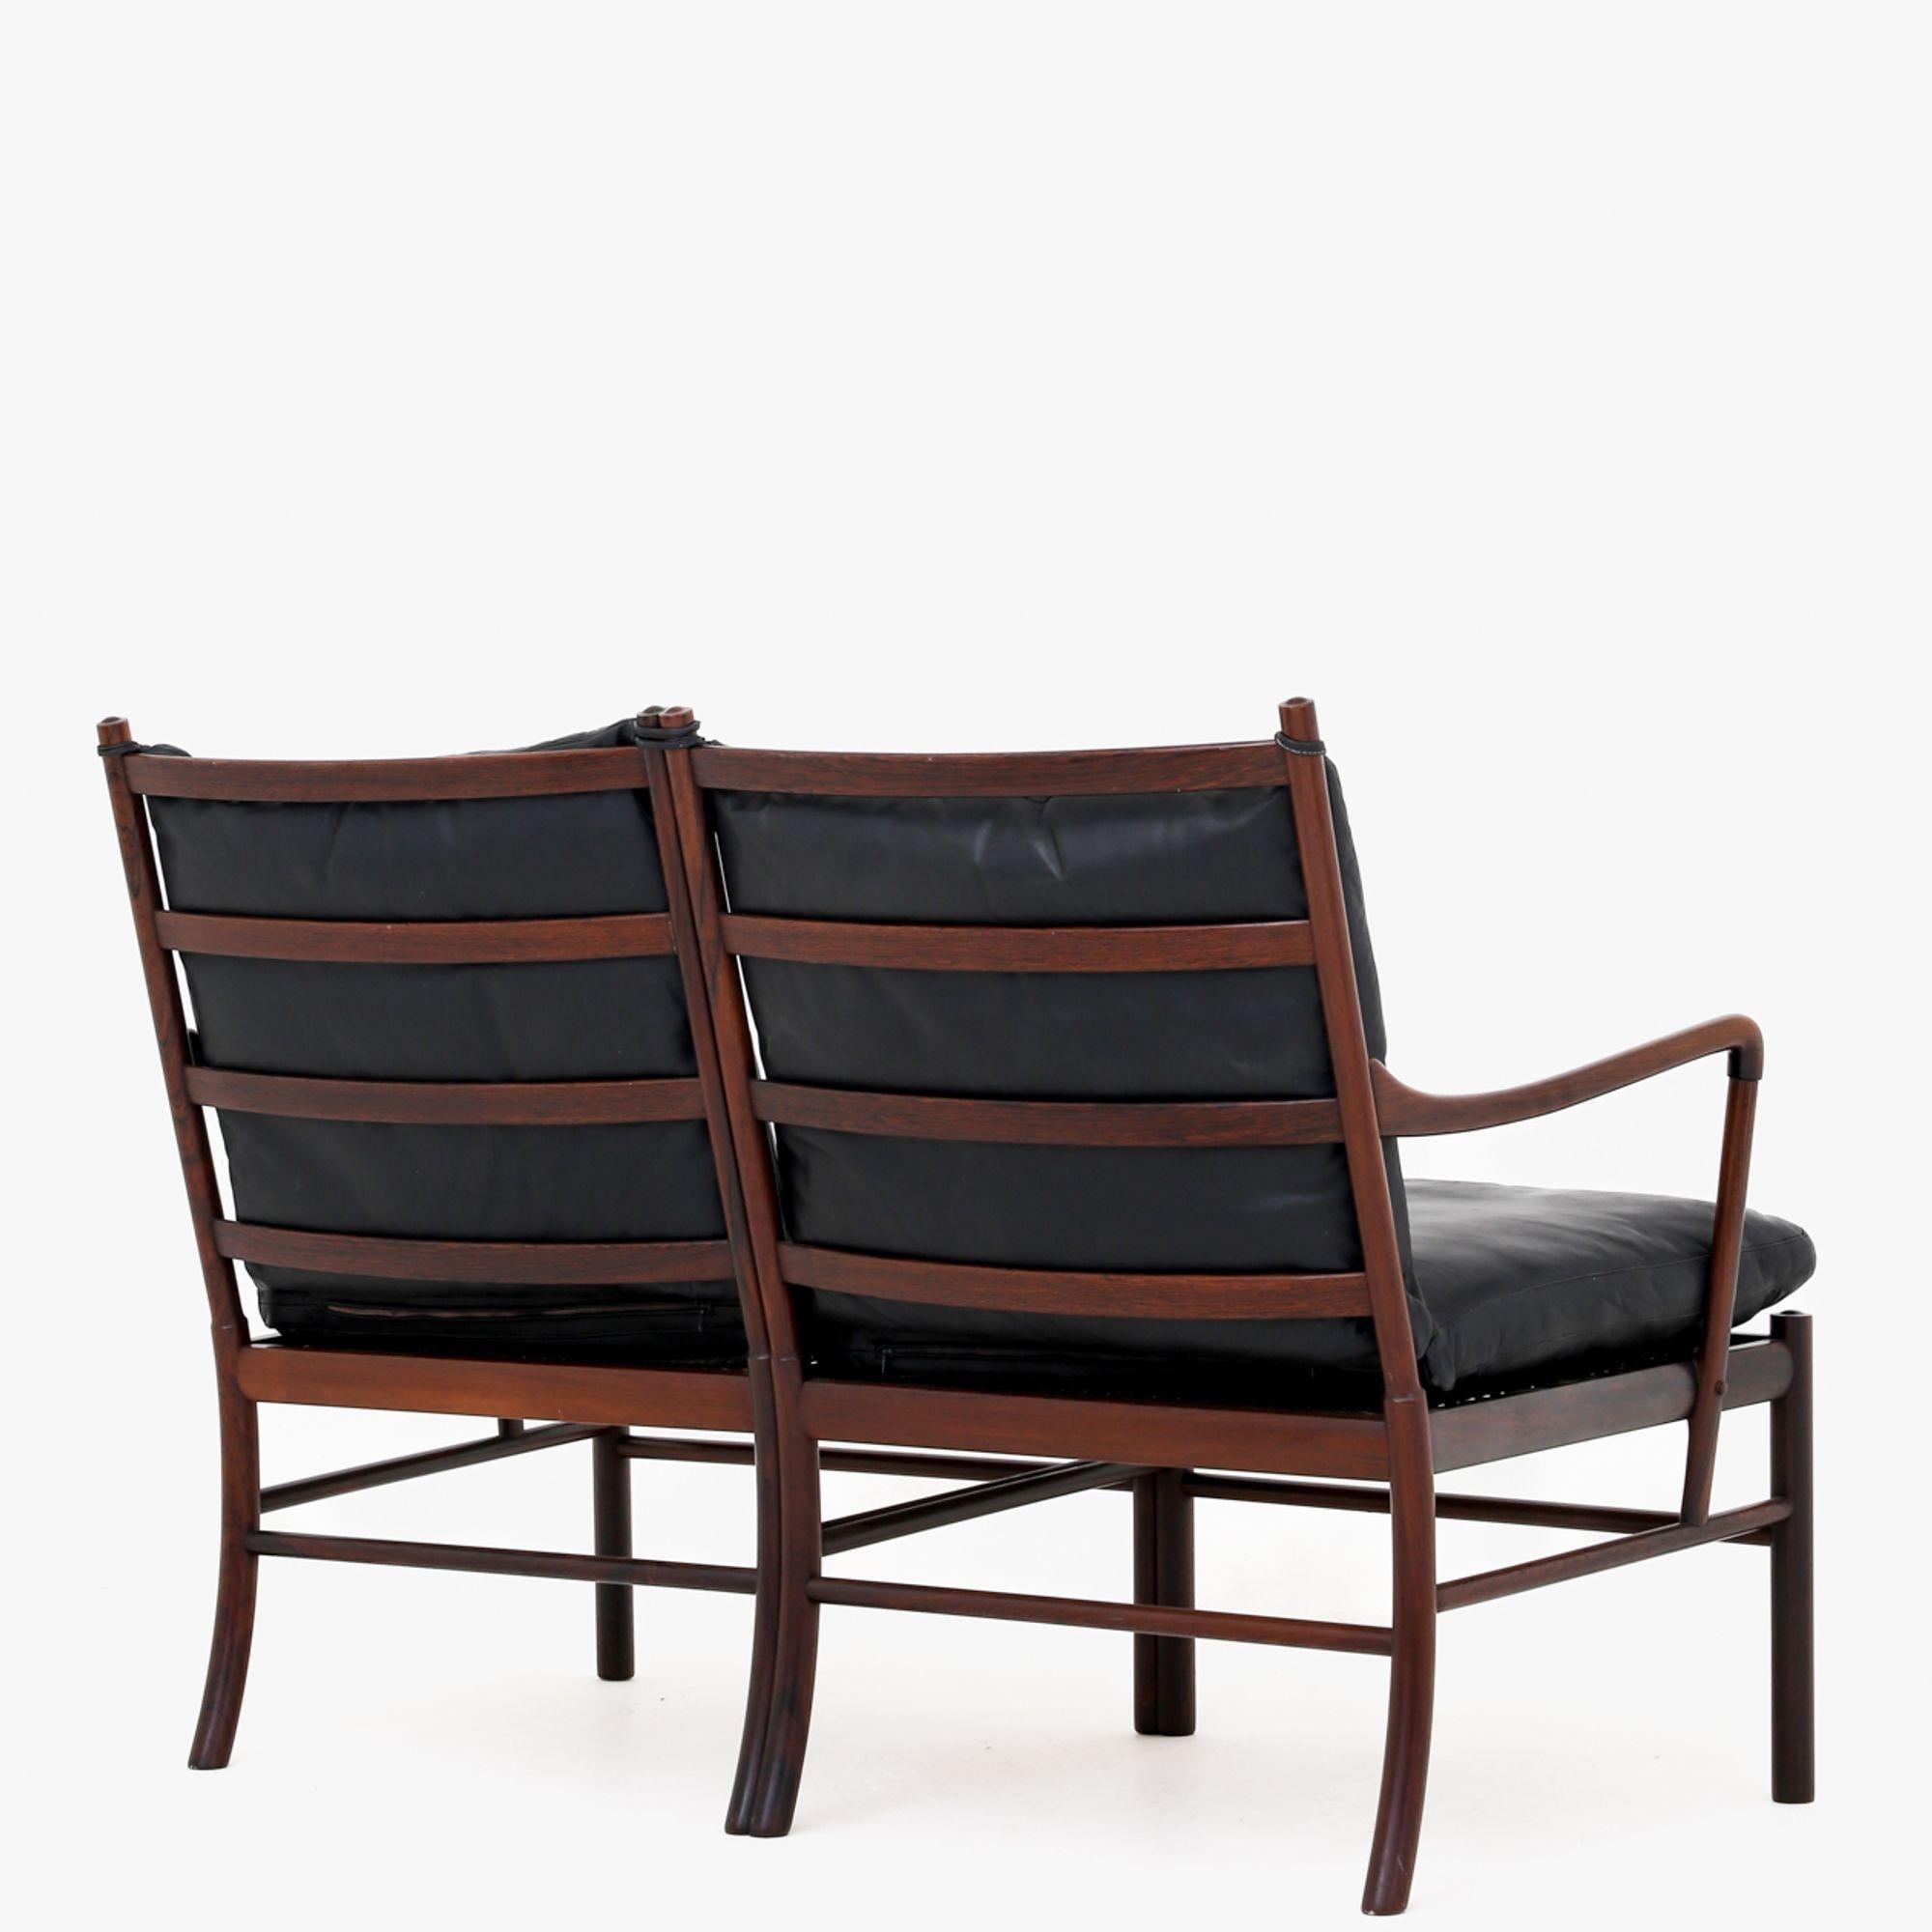 PJ 149/2 - 'Colonial' 2-seater sofa in rosewood with cushions in black patinated leather. Ole Wanscher / P. Jeppesen